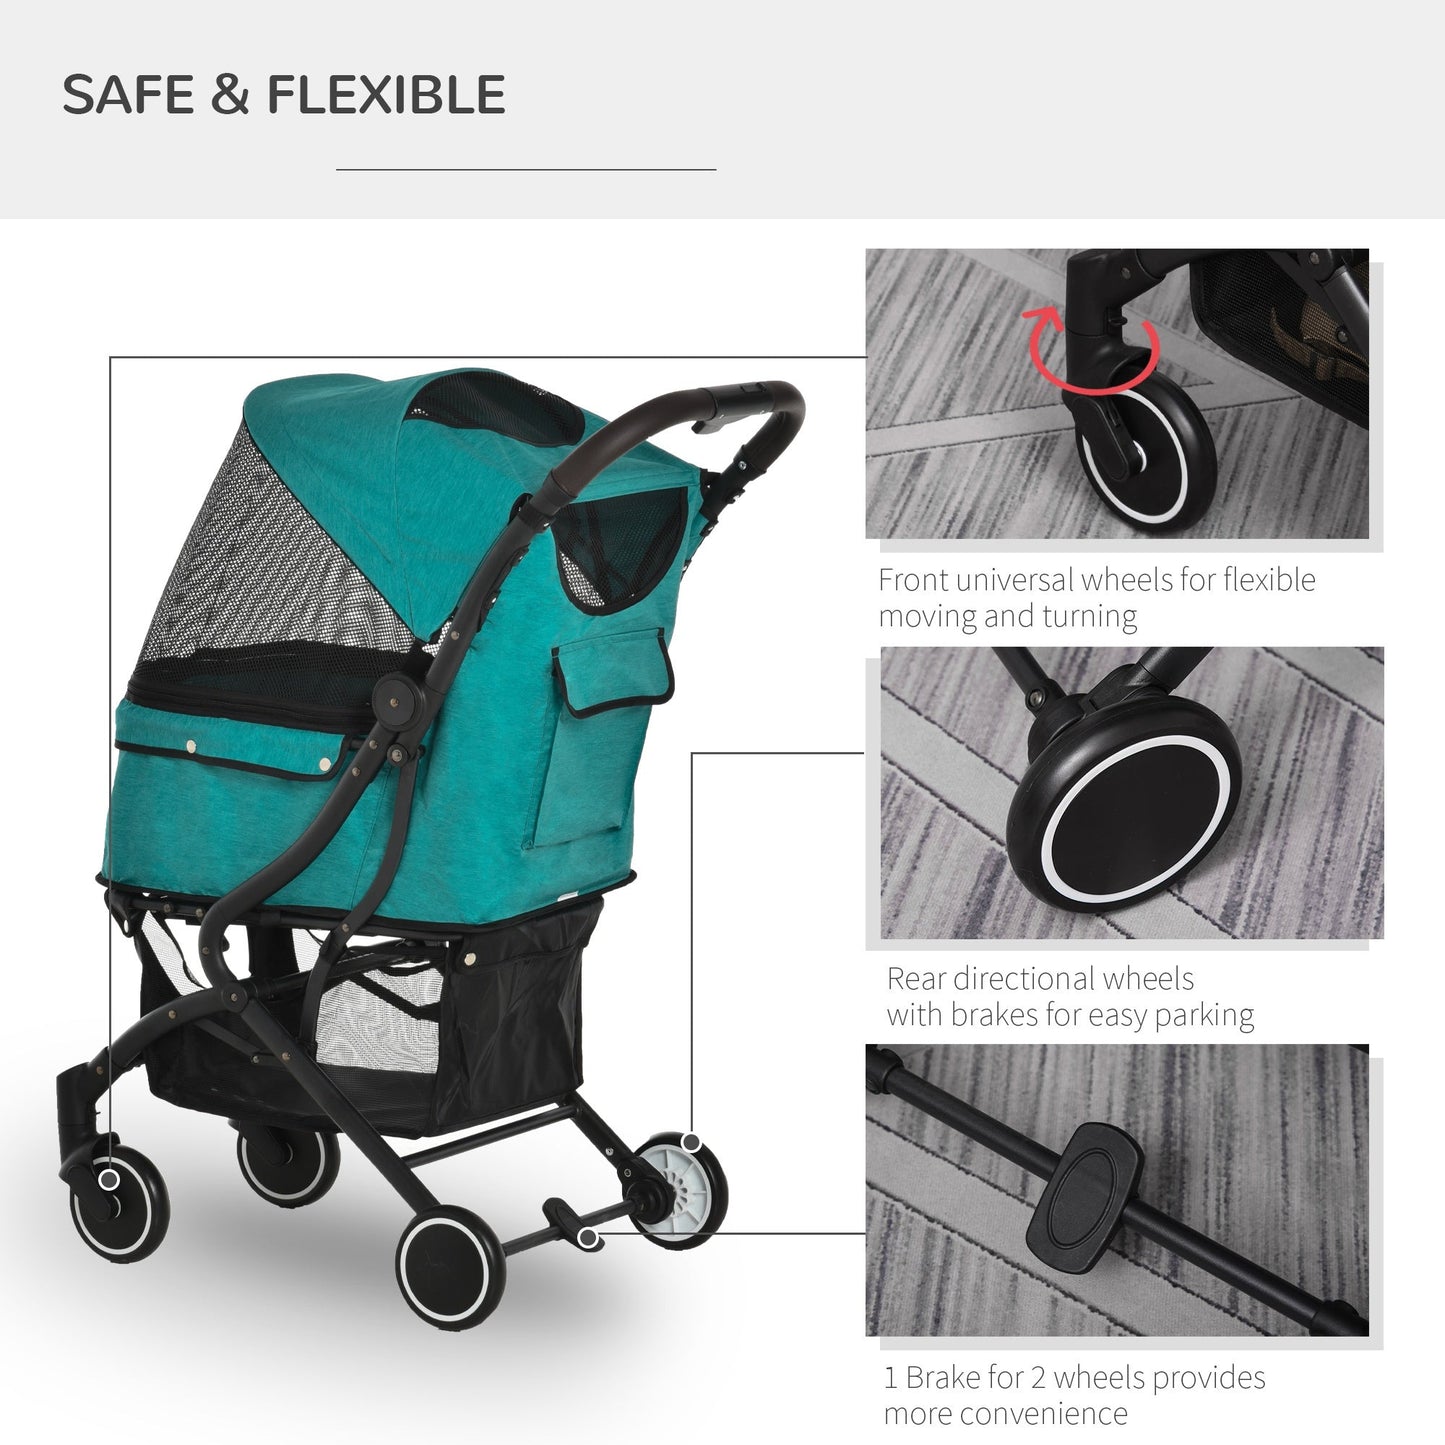 Pet Supplies-Pet Stroller for Dogs, Cats, One-Click Fold Jogger Pushchair with EVA Wheels, Brakes, Basket, Safety Belts, Zippered Mesh Window Door, Blue - Outdoor Style Company